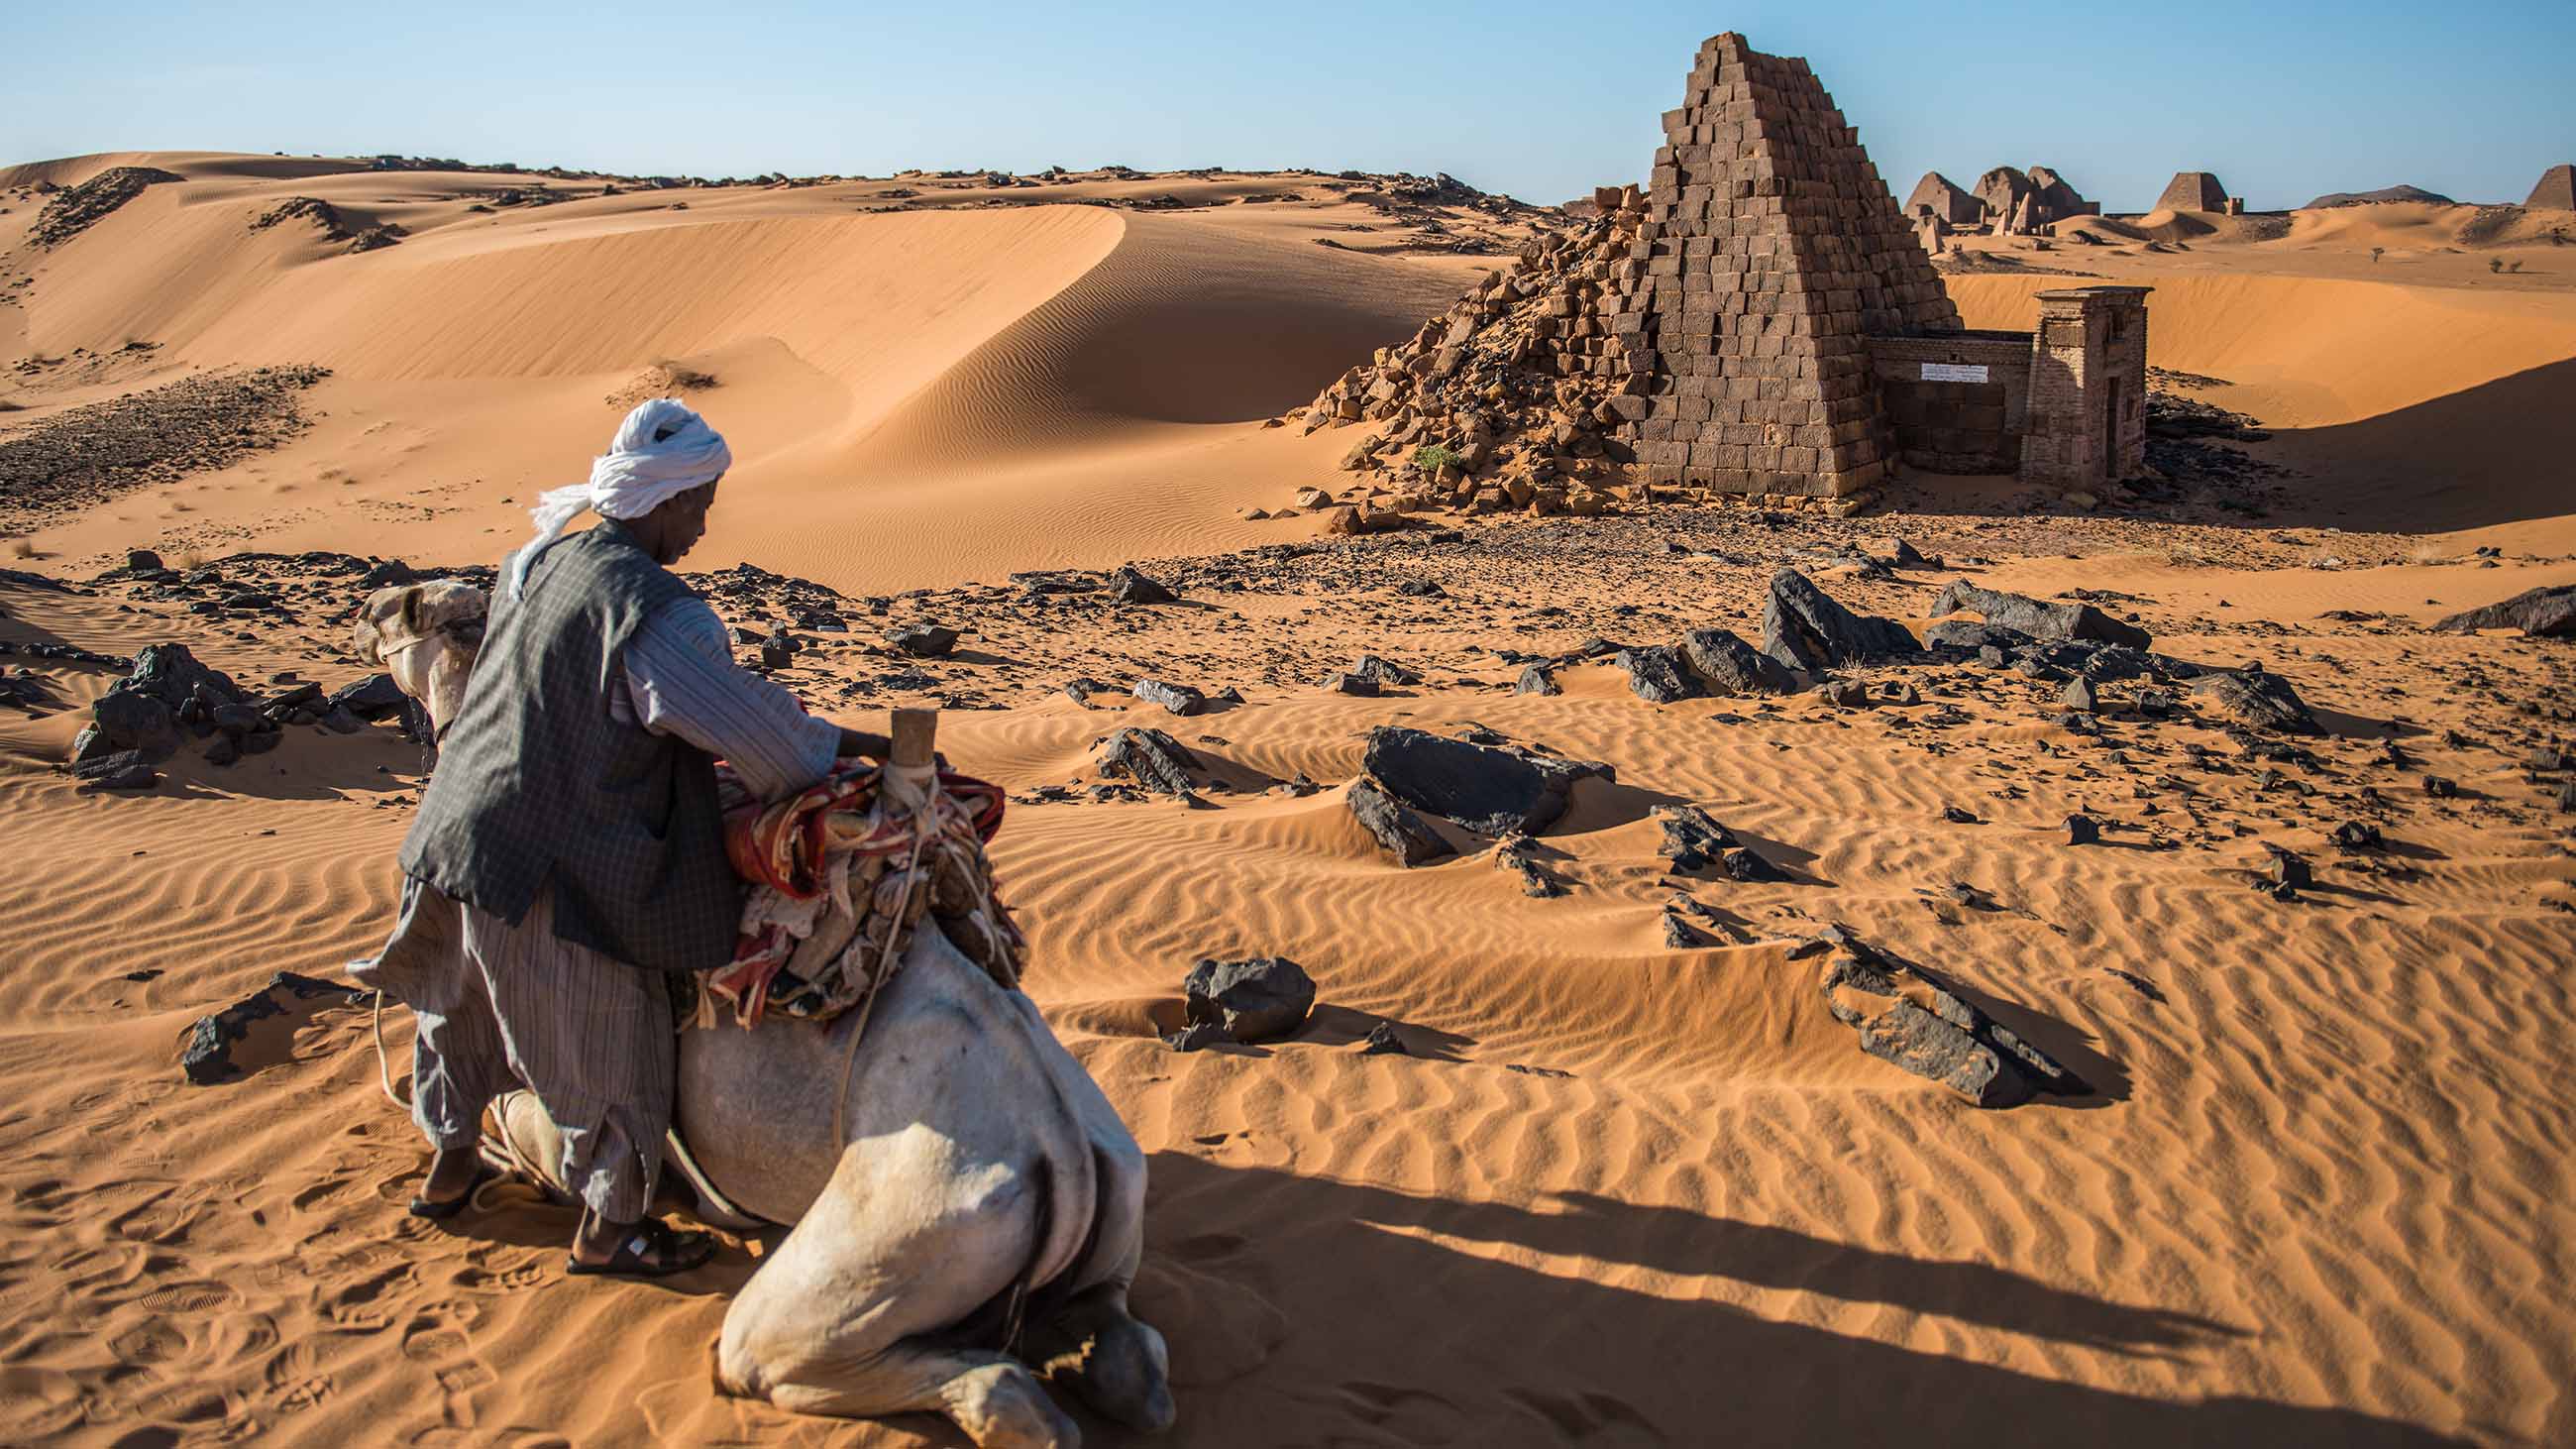 Since the 1980s, sand storms have increasingly eroded the intricately carved walls of 43 decorative Kushite pyramids at a UNESCO World Heritage site named Meroe.